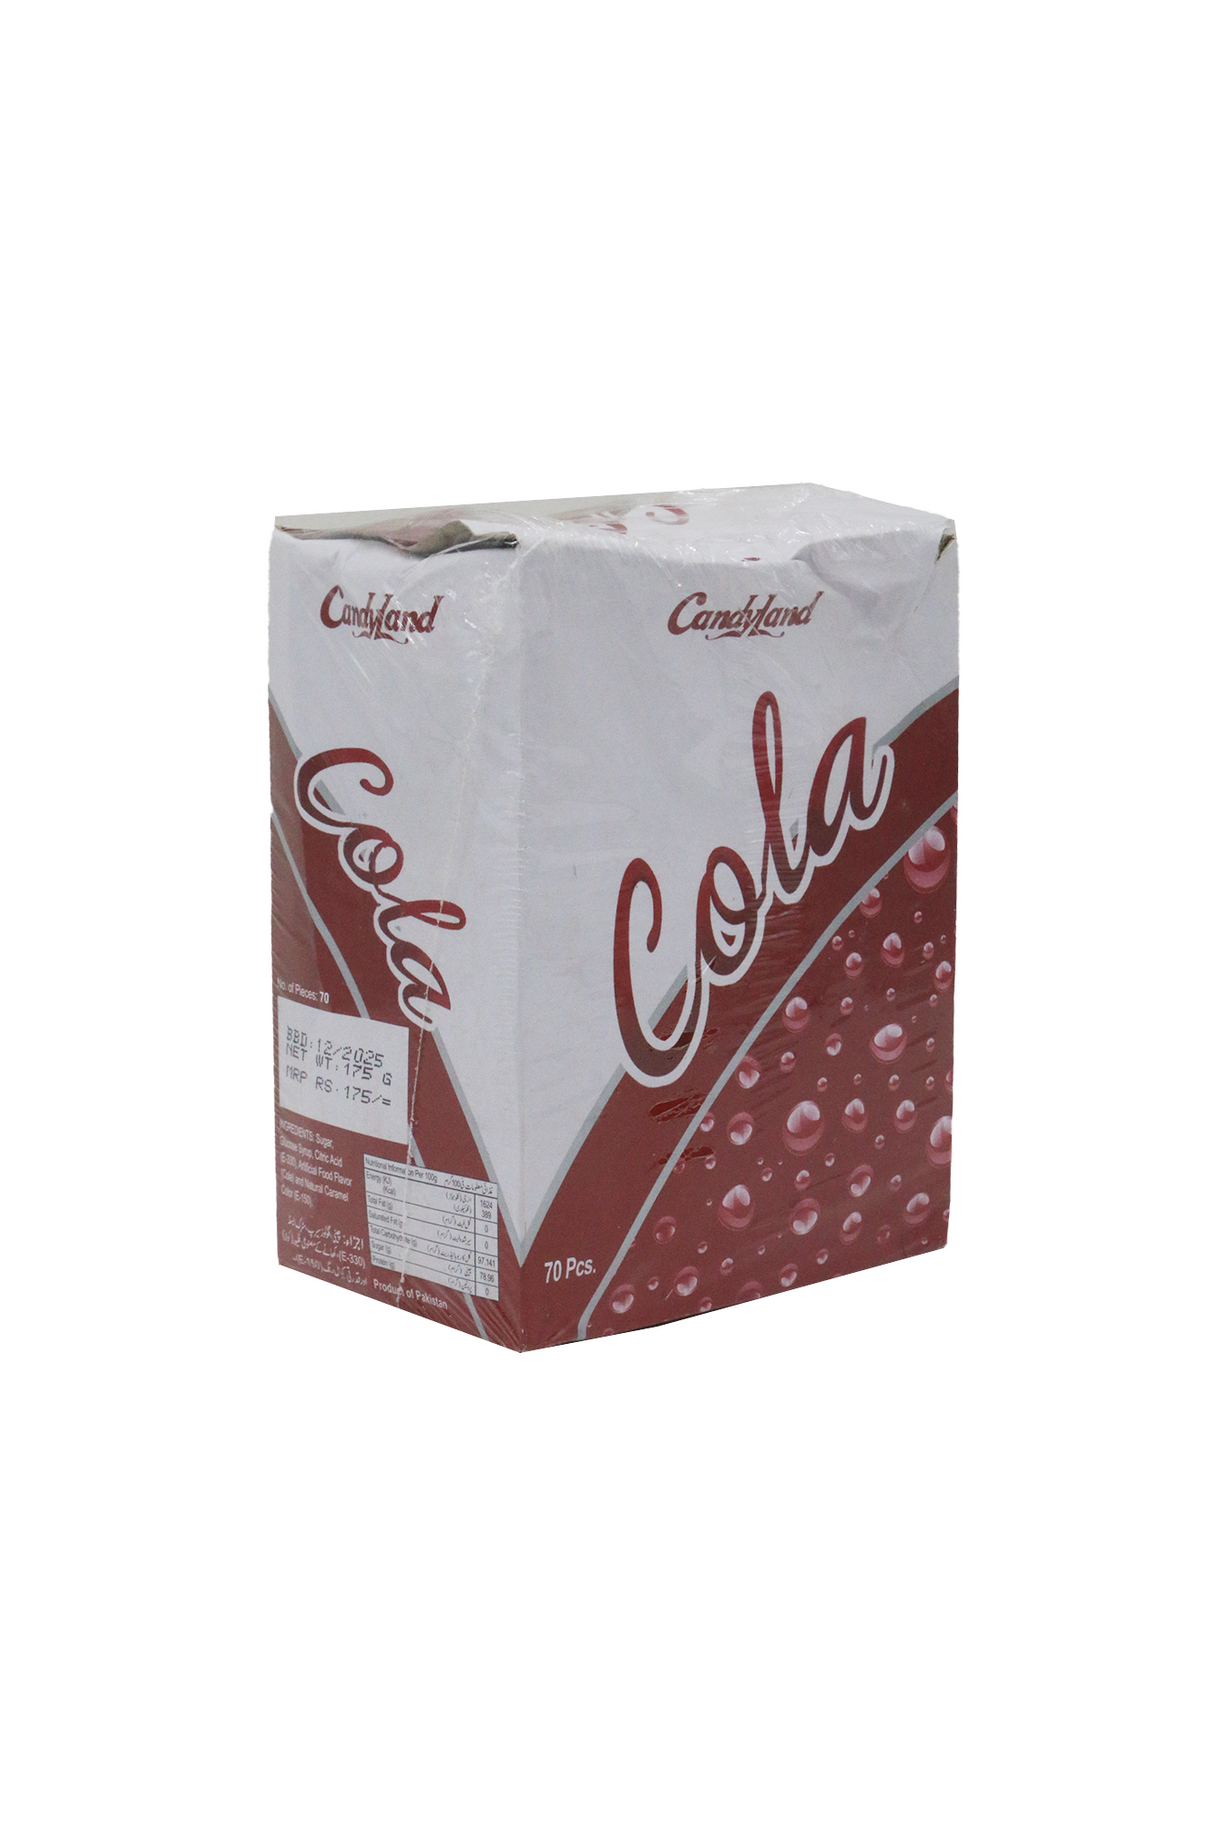 candyland candy cola box 175g